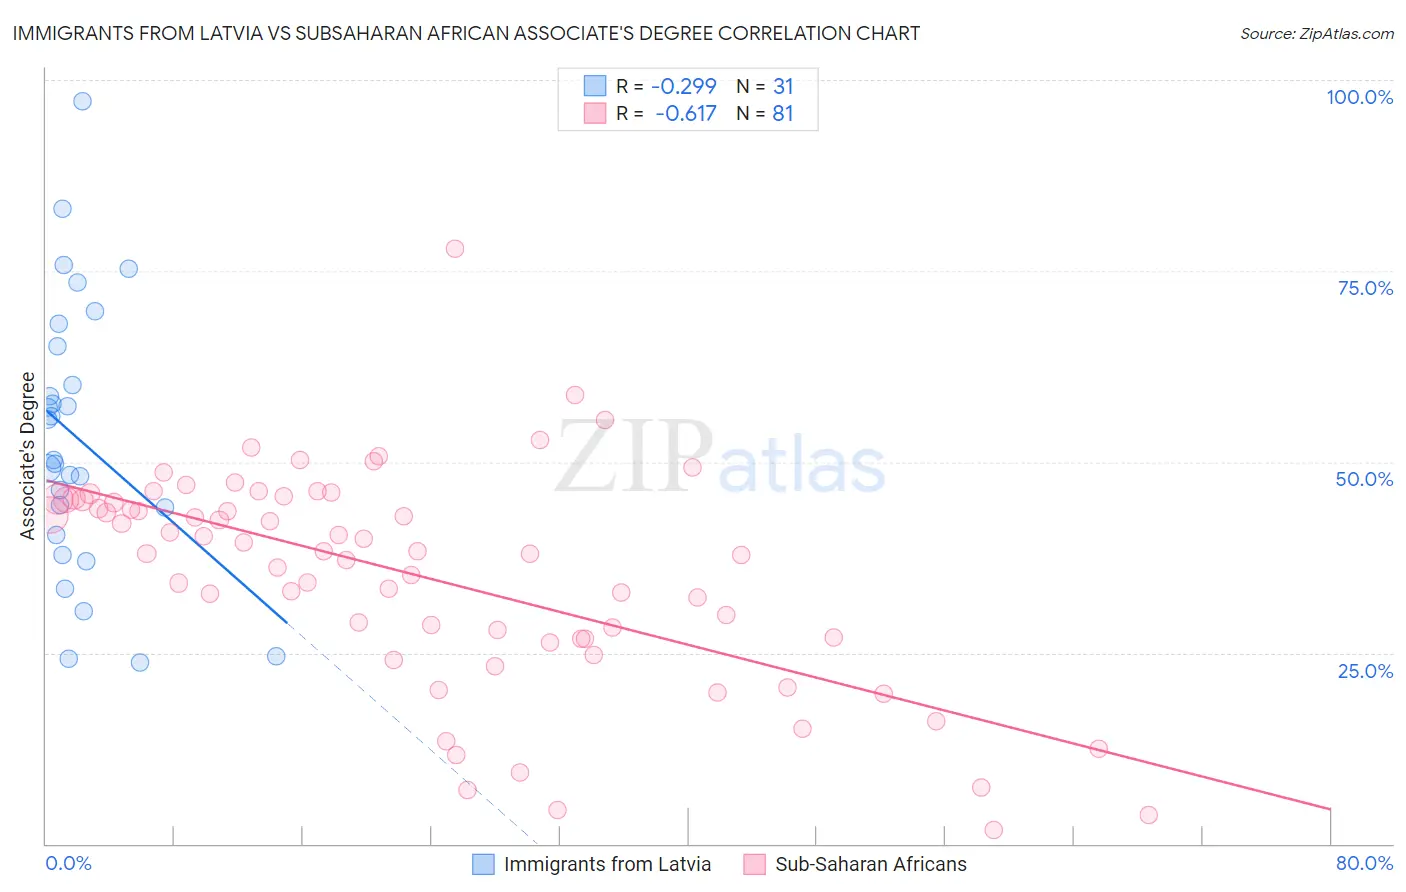 Immigrants from Latvia vs Subsaharan African Associate's Degree